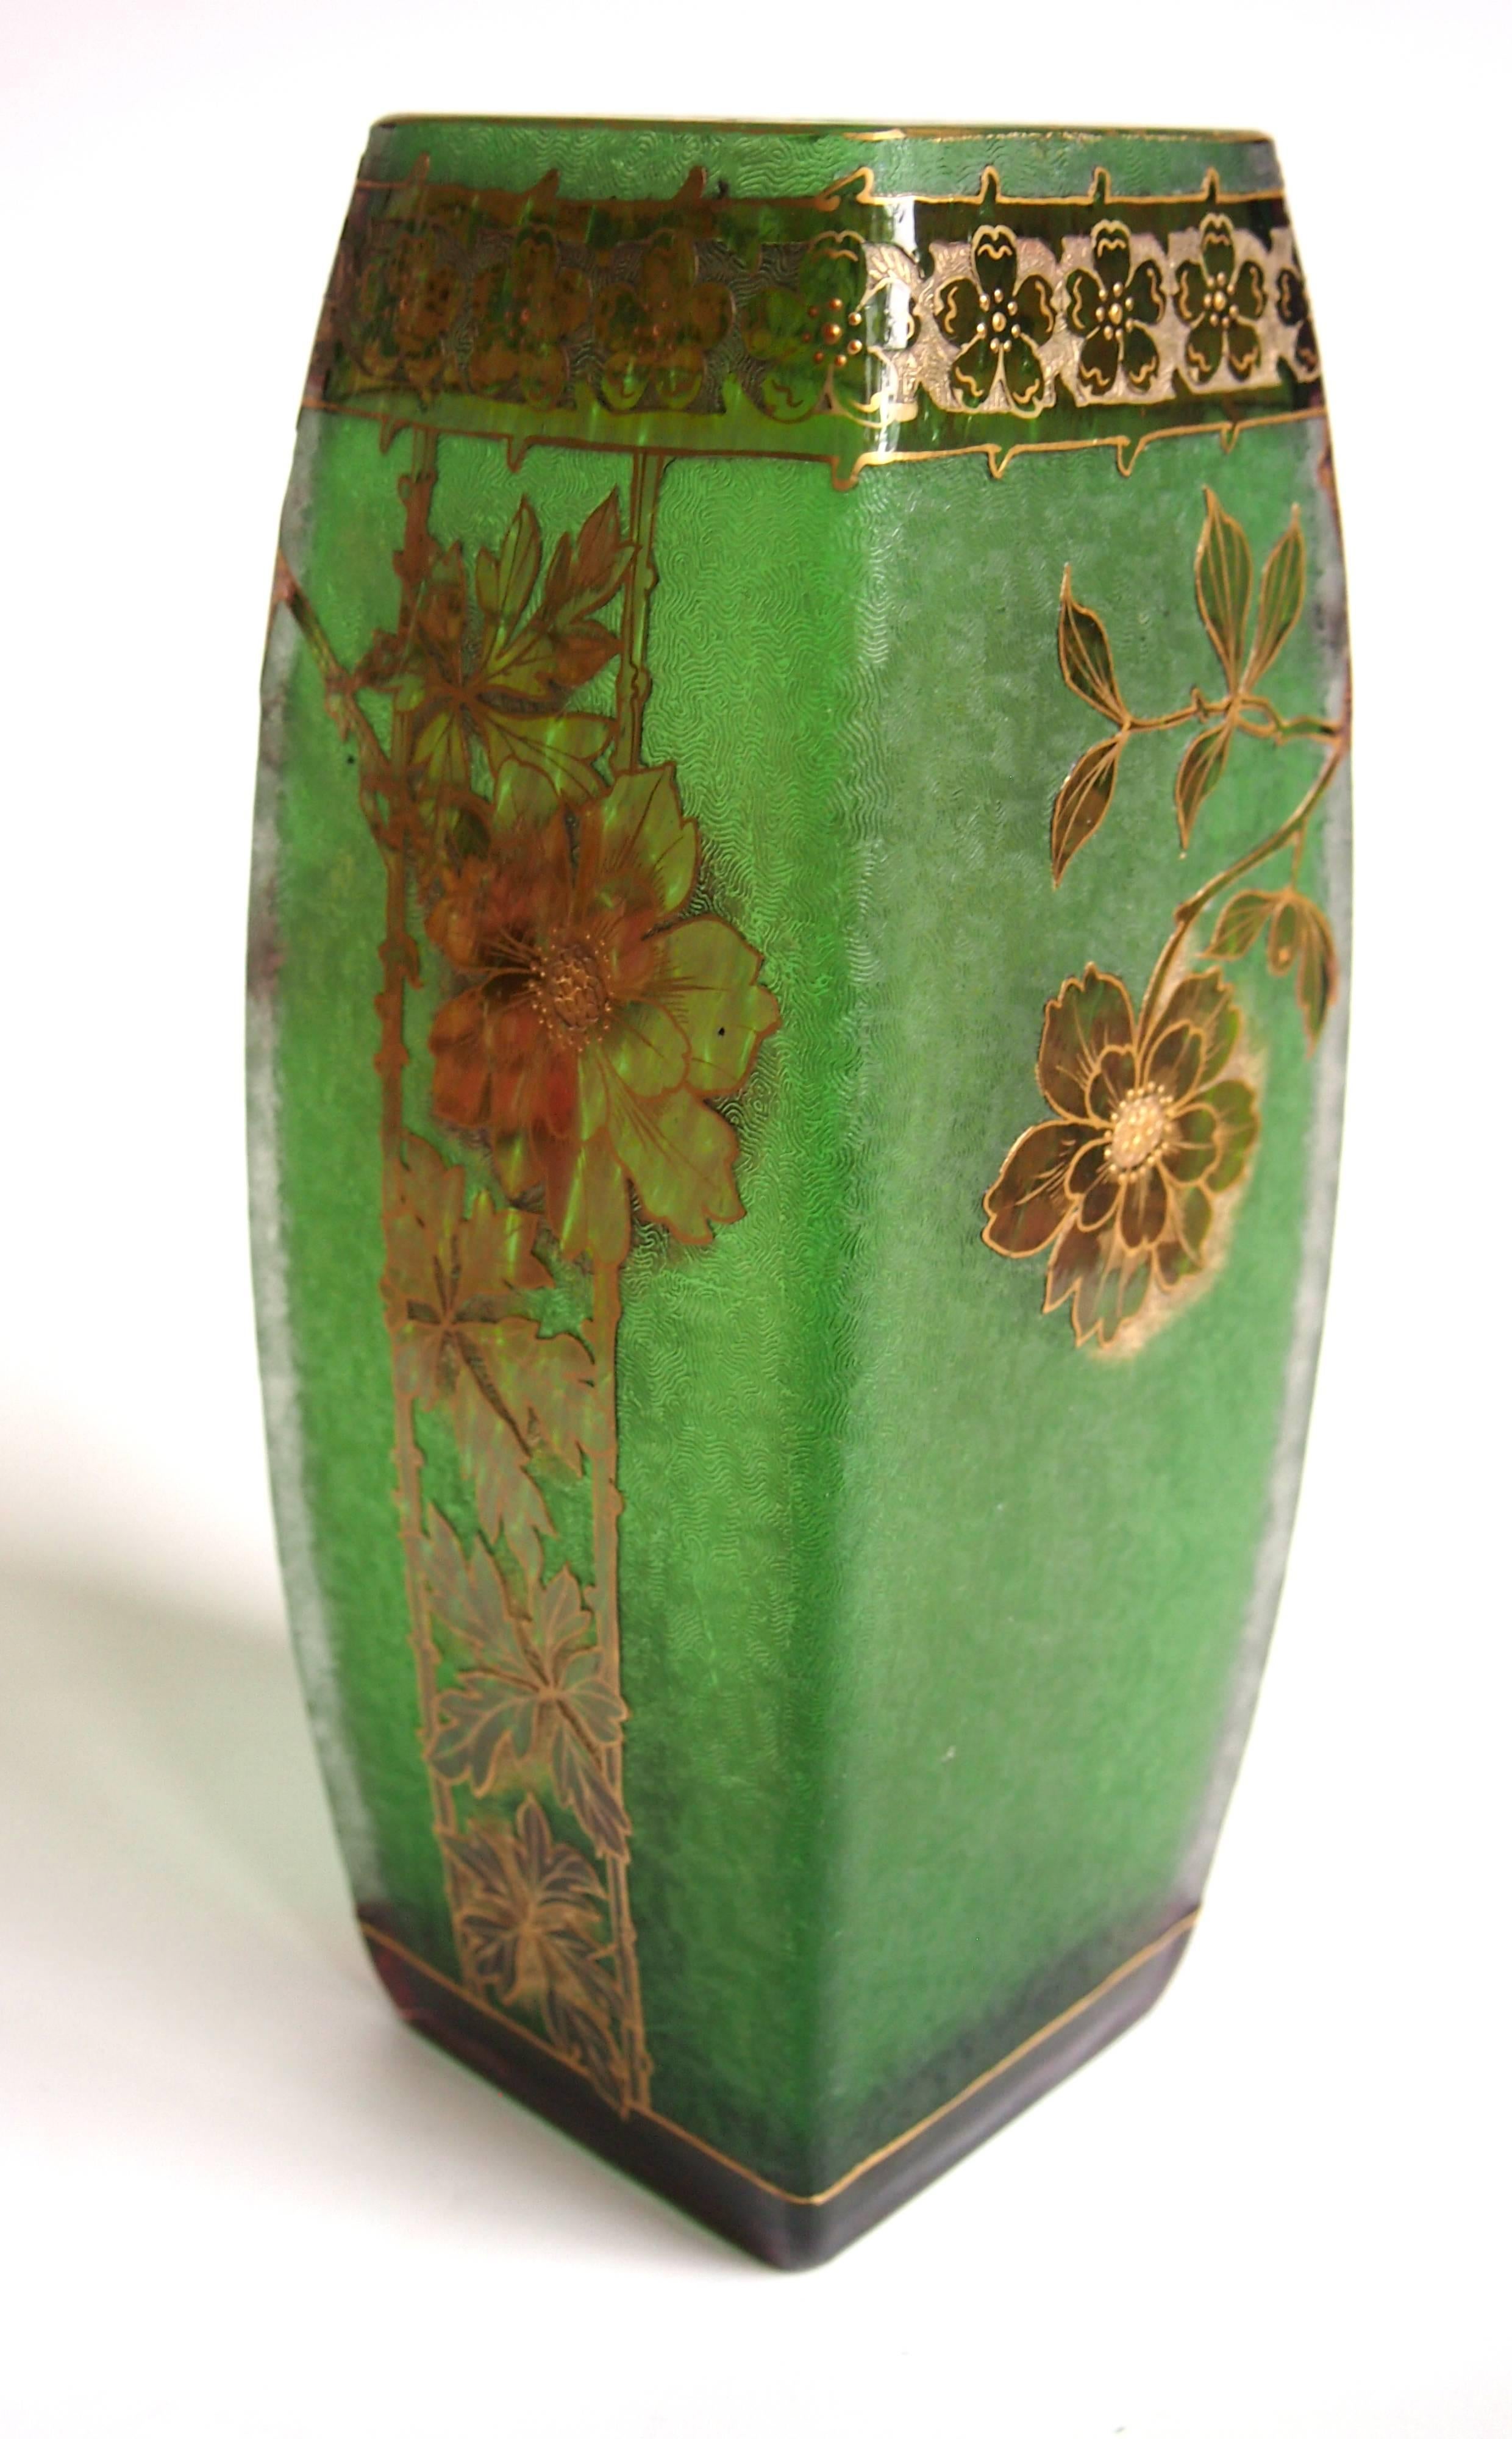 Superb Art Nouveau purple over green gilded Riedel cameo vase depicting stylized flowers. This range was first presented by Riedel at the 1900 Paris Exhibition -an almost identical vase is pictured (Fig 103) in the famous book 'Moderne Glasser' by